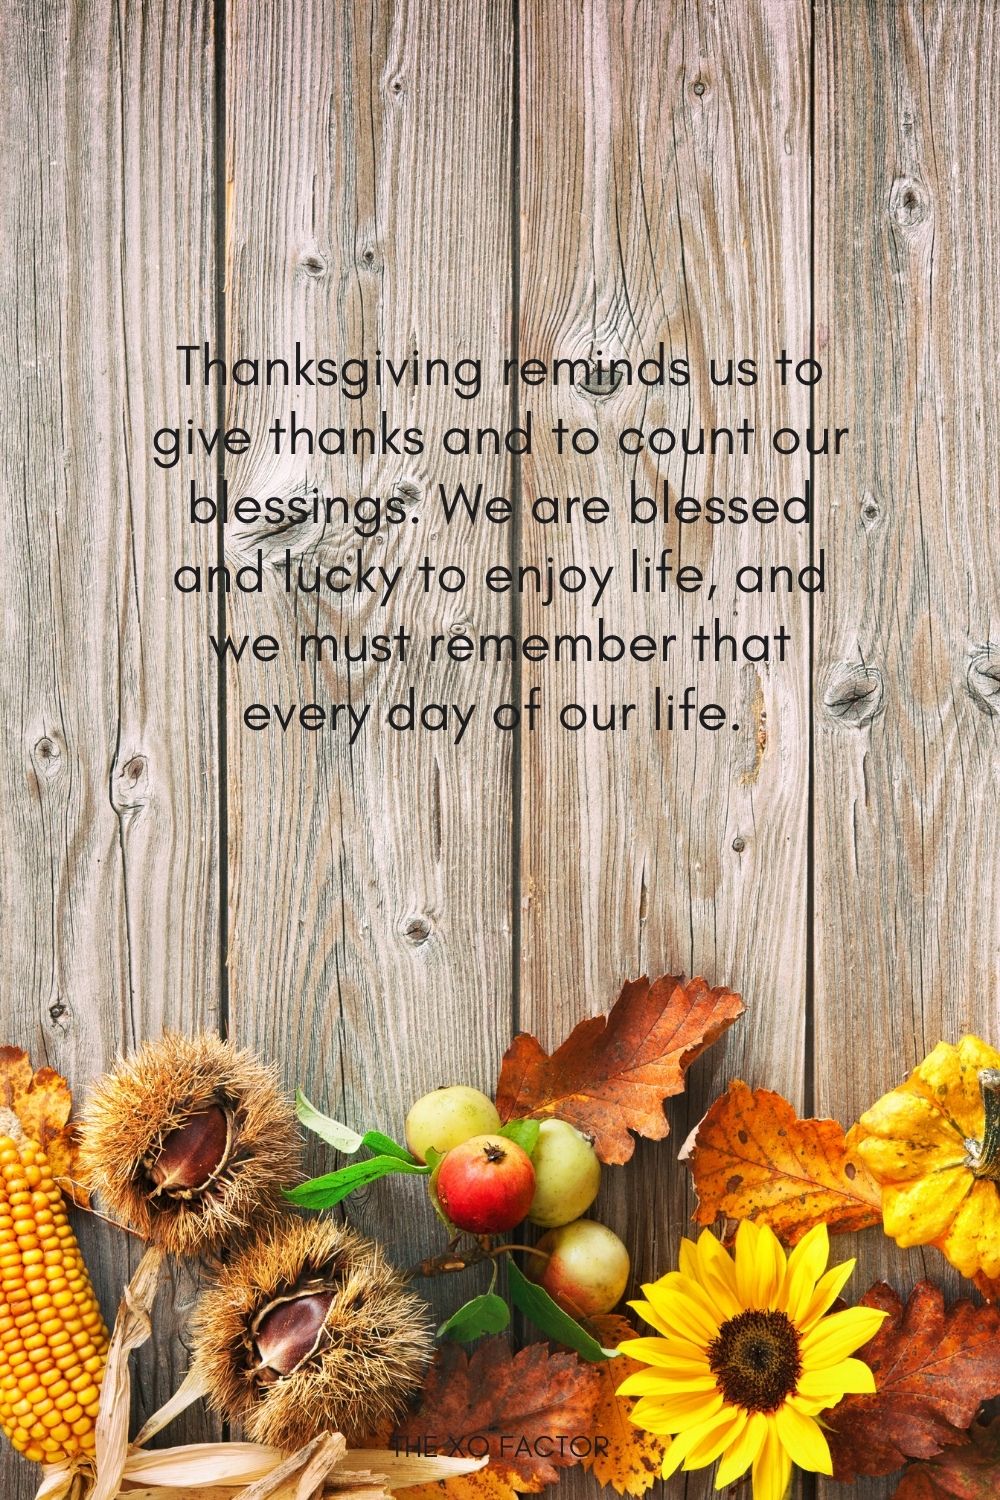 Thanksgiving reminds us to give thanks and to count our blessings. We are blessed and lucky to enjoy life, and we must remember that every day of our life.